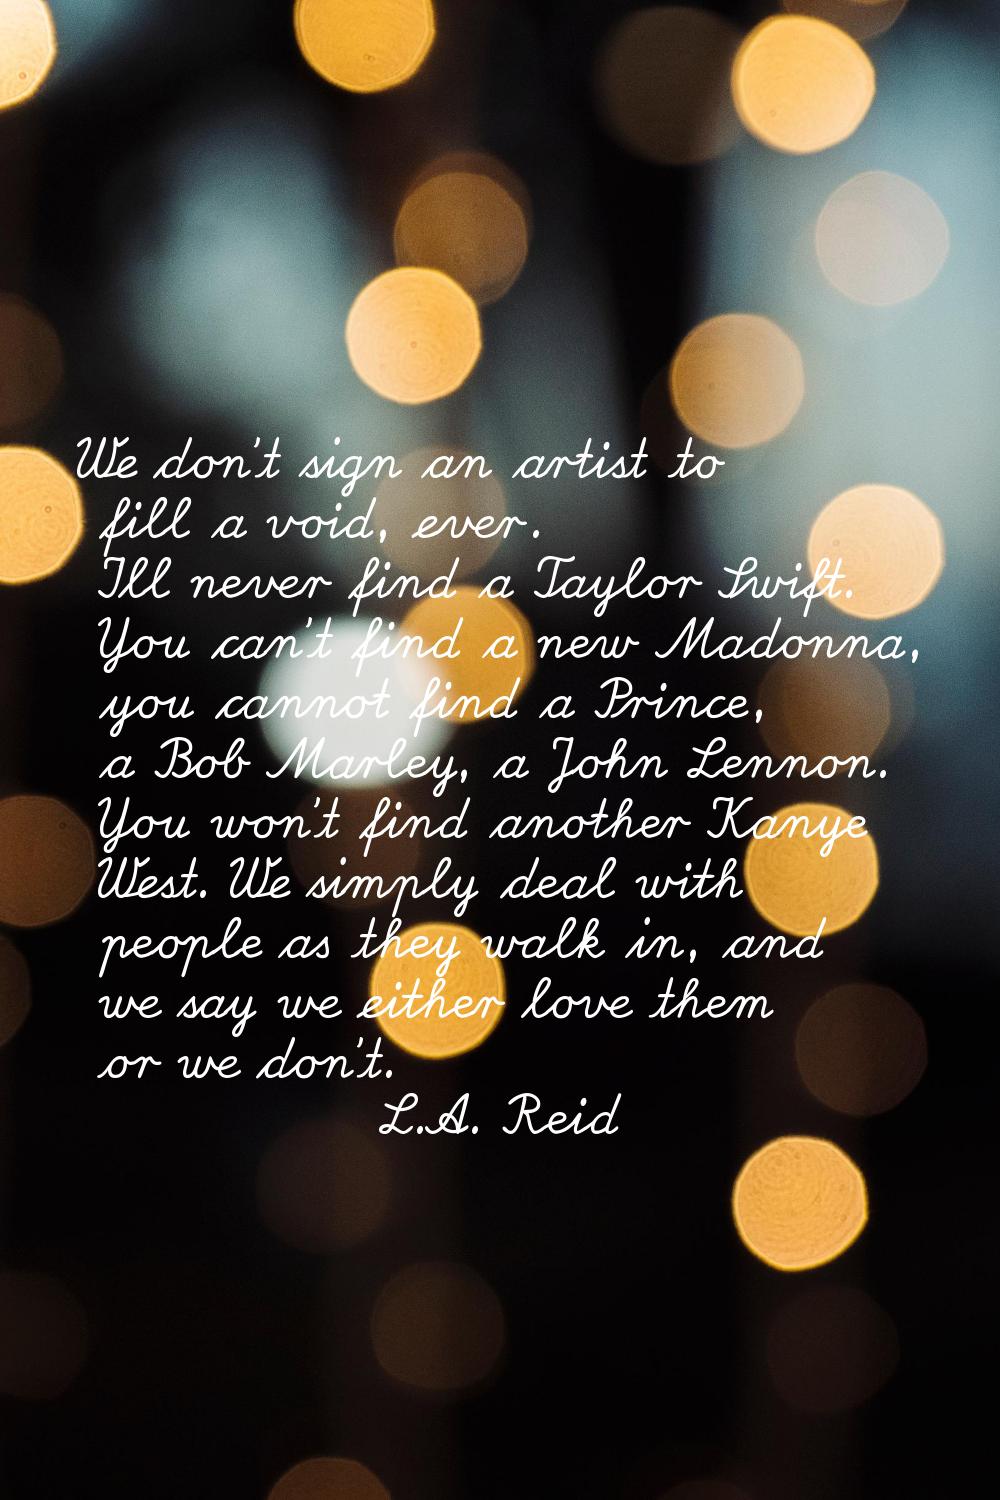 We don't sign an artist to fill a void, ever. I'll never find a Taylor Swift. You can't find a new 